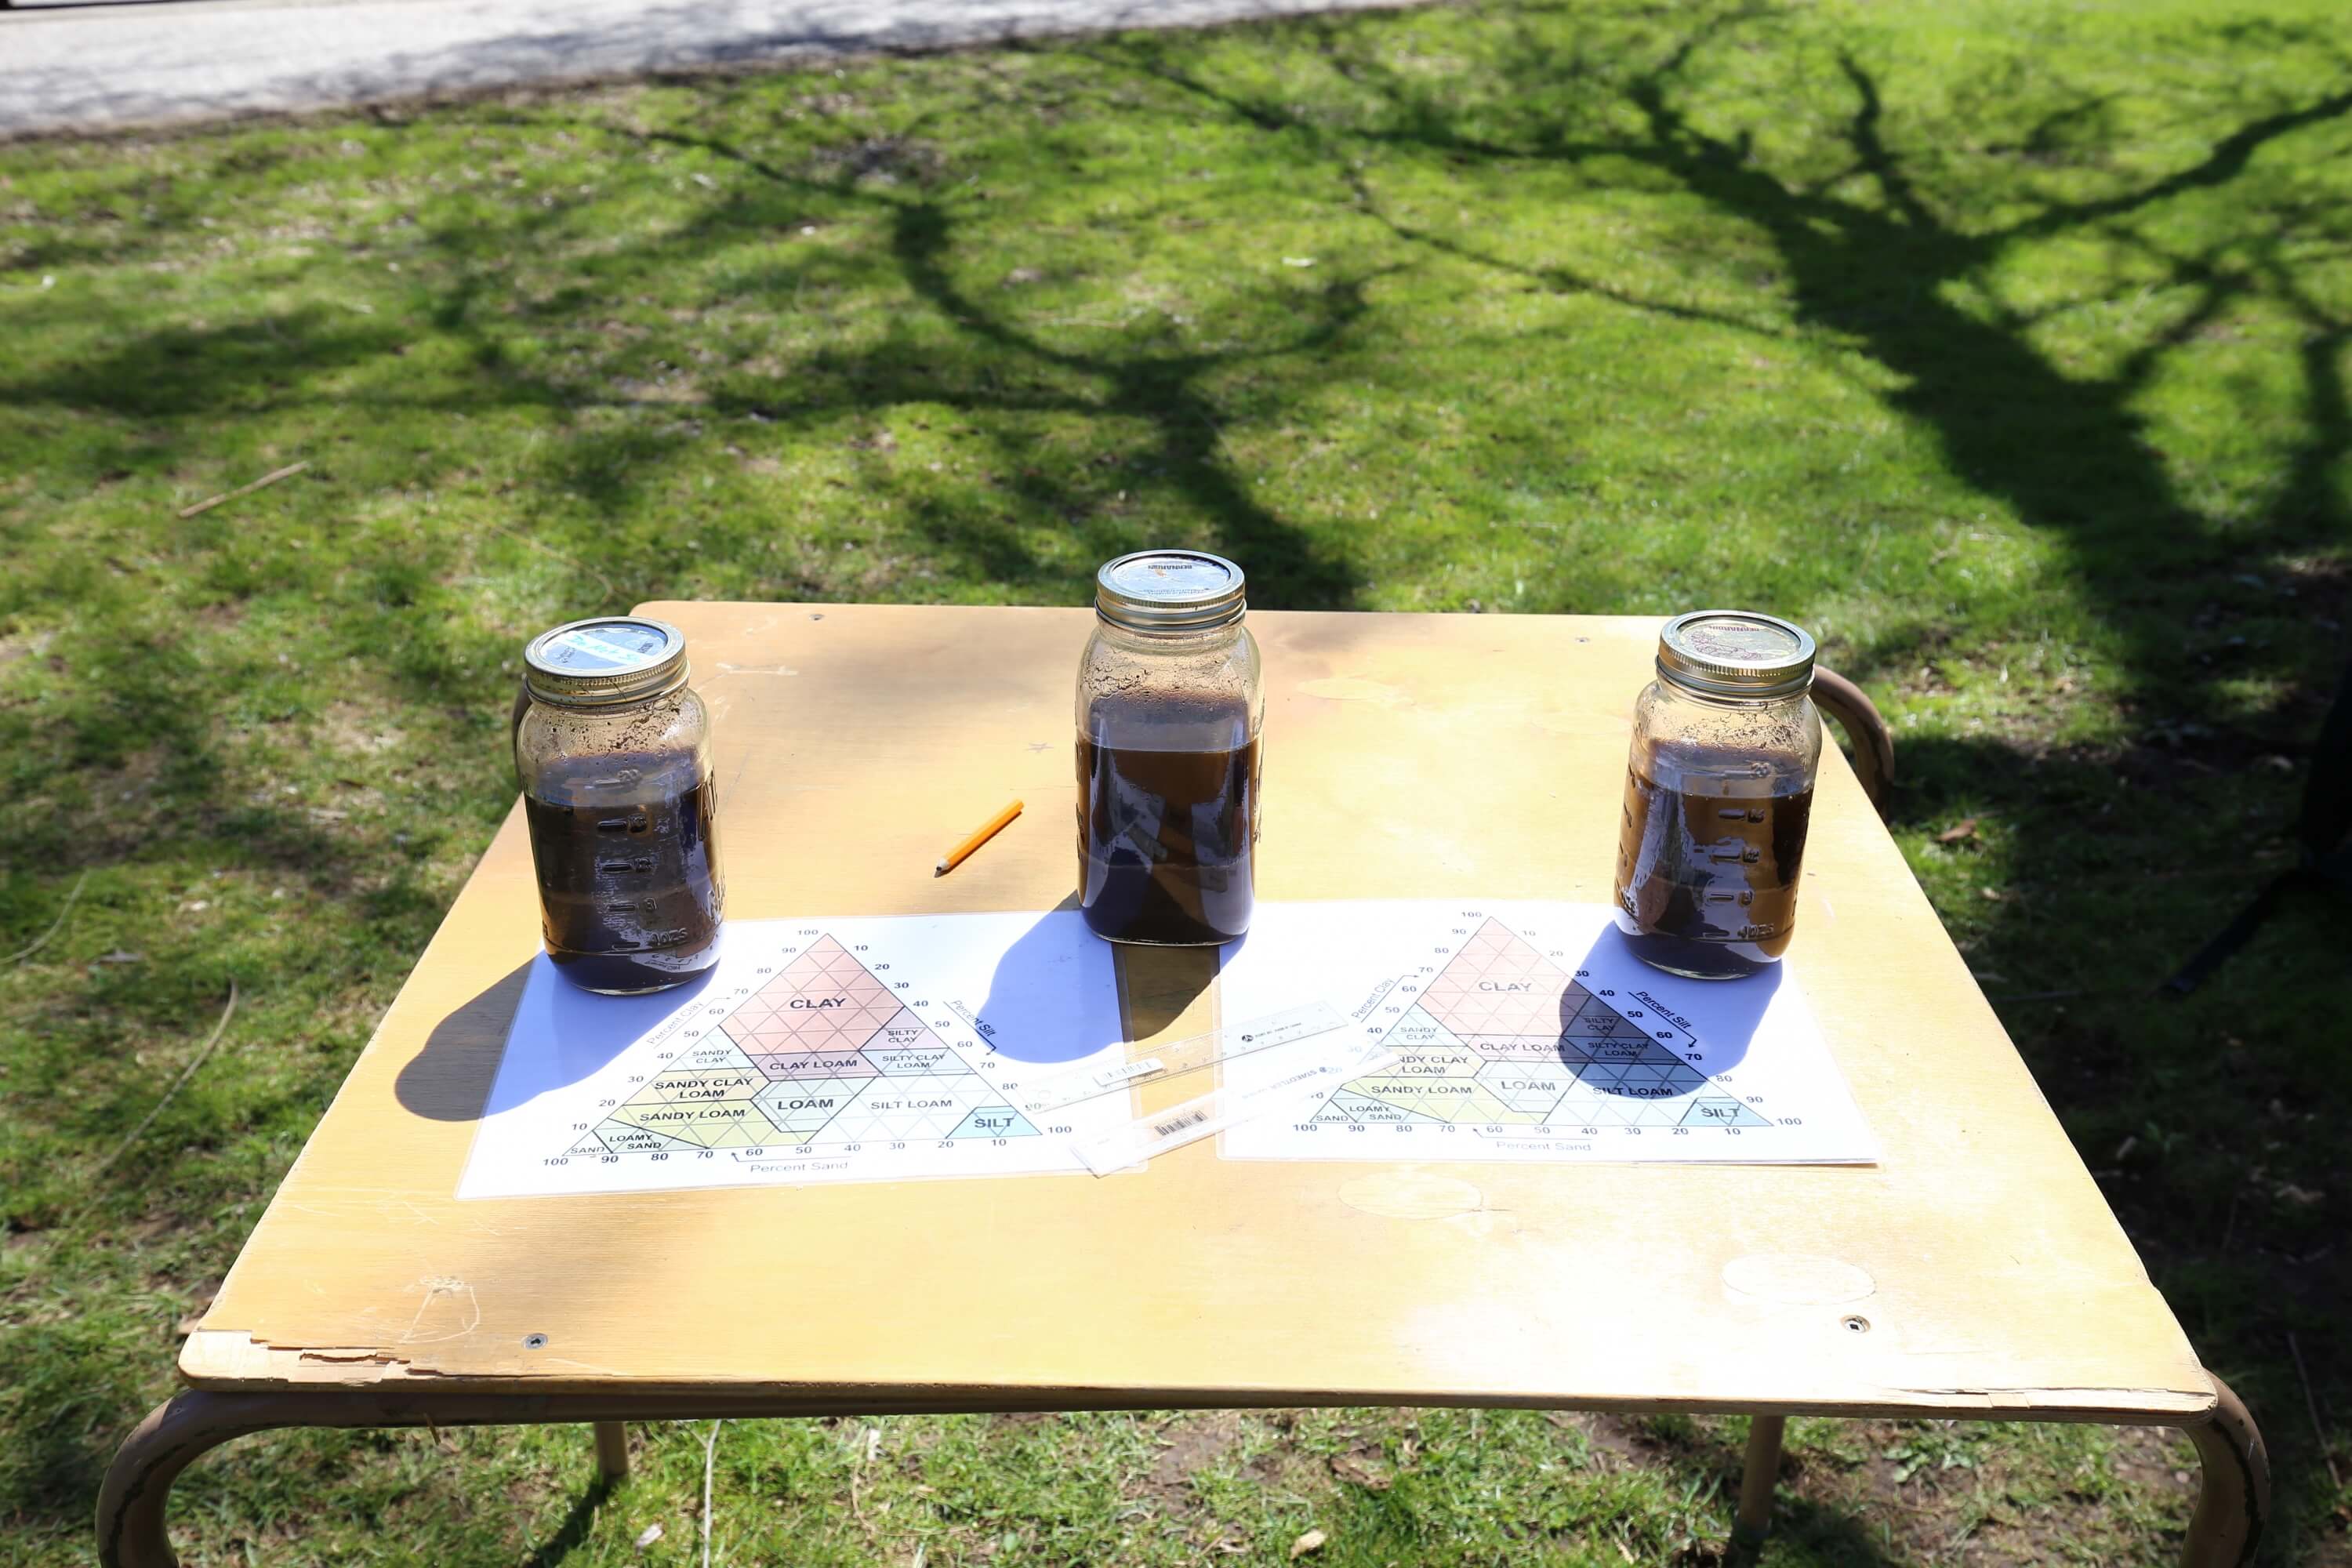 Soil samples in mason jars and soil triangles laid out on the table